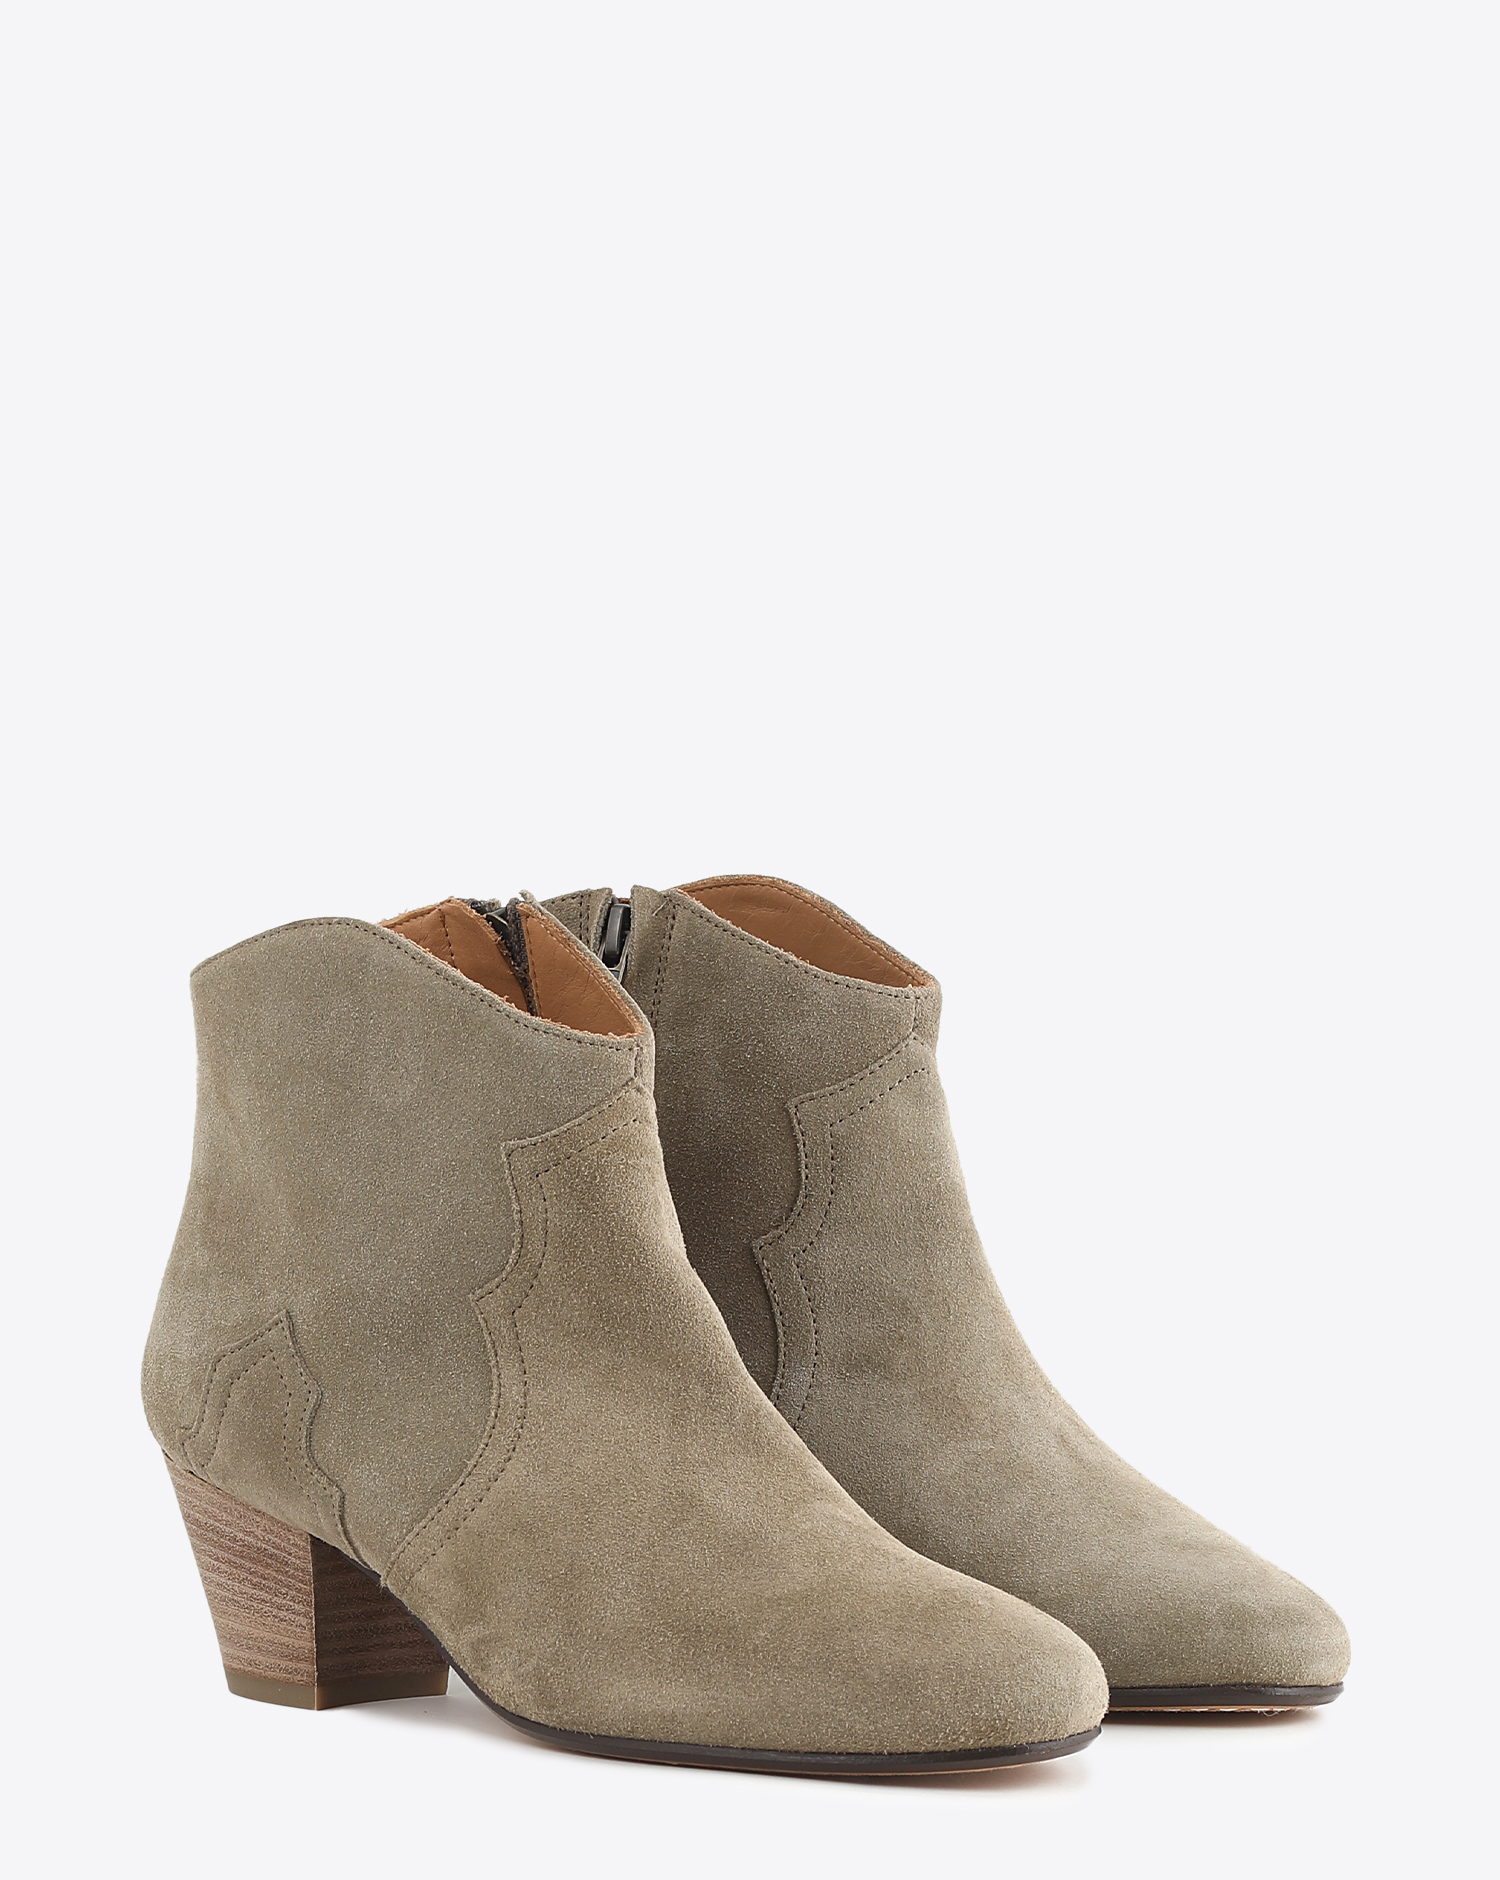 Boots Dicker taupe Isabel Marant 